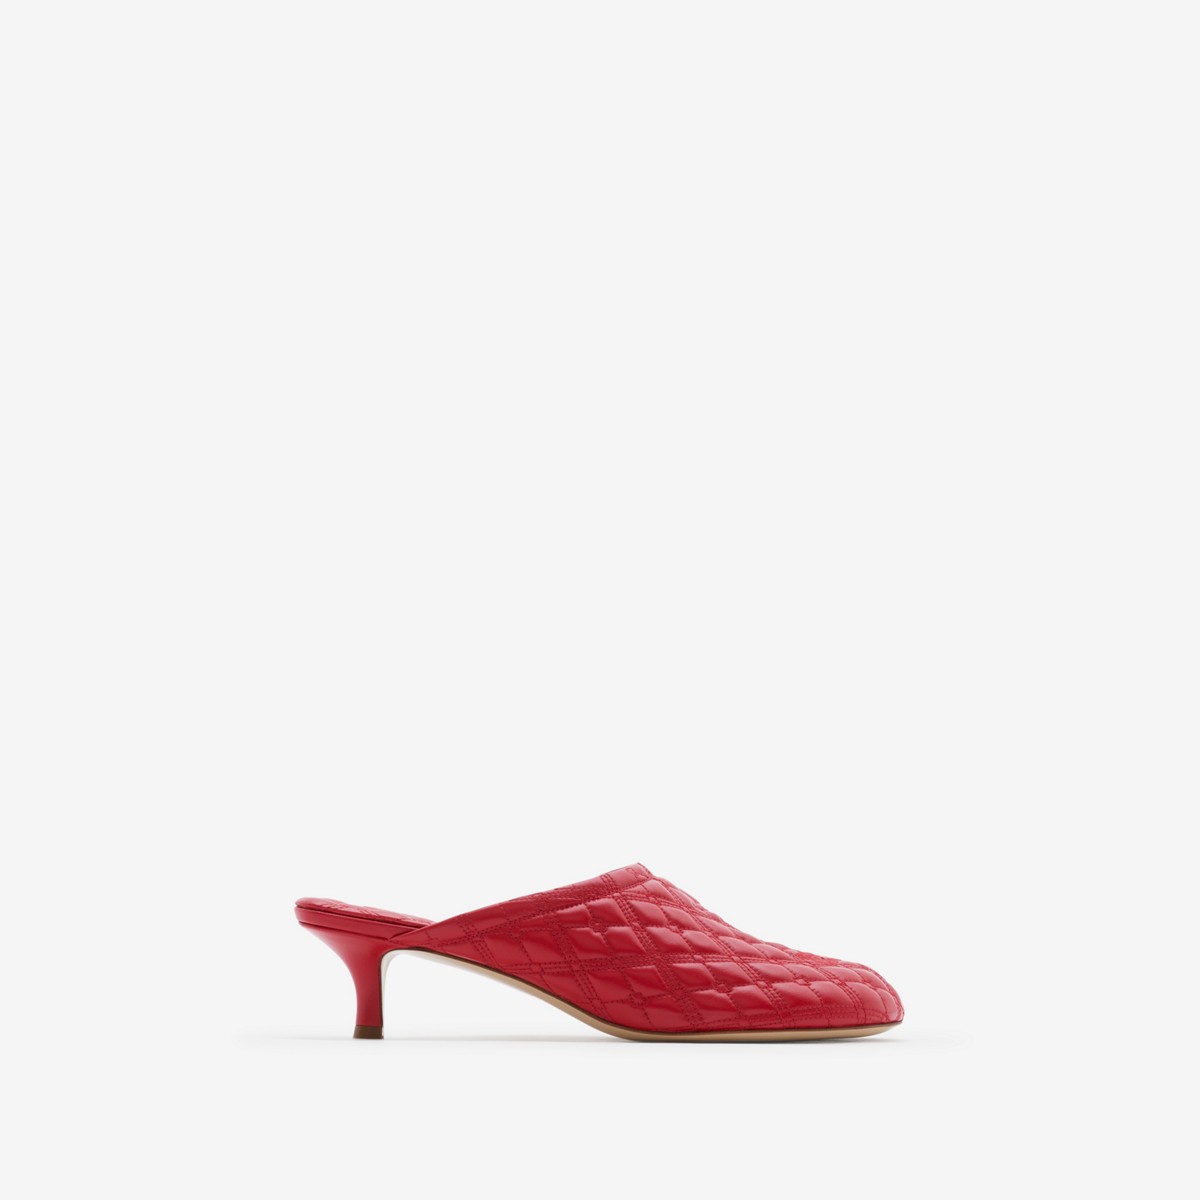 Burberry Leather Ekd Baby Heeled Mules 45 In Scarlet